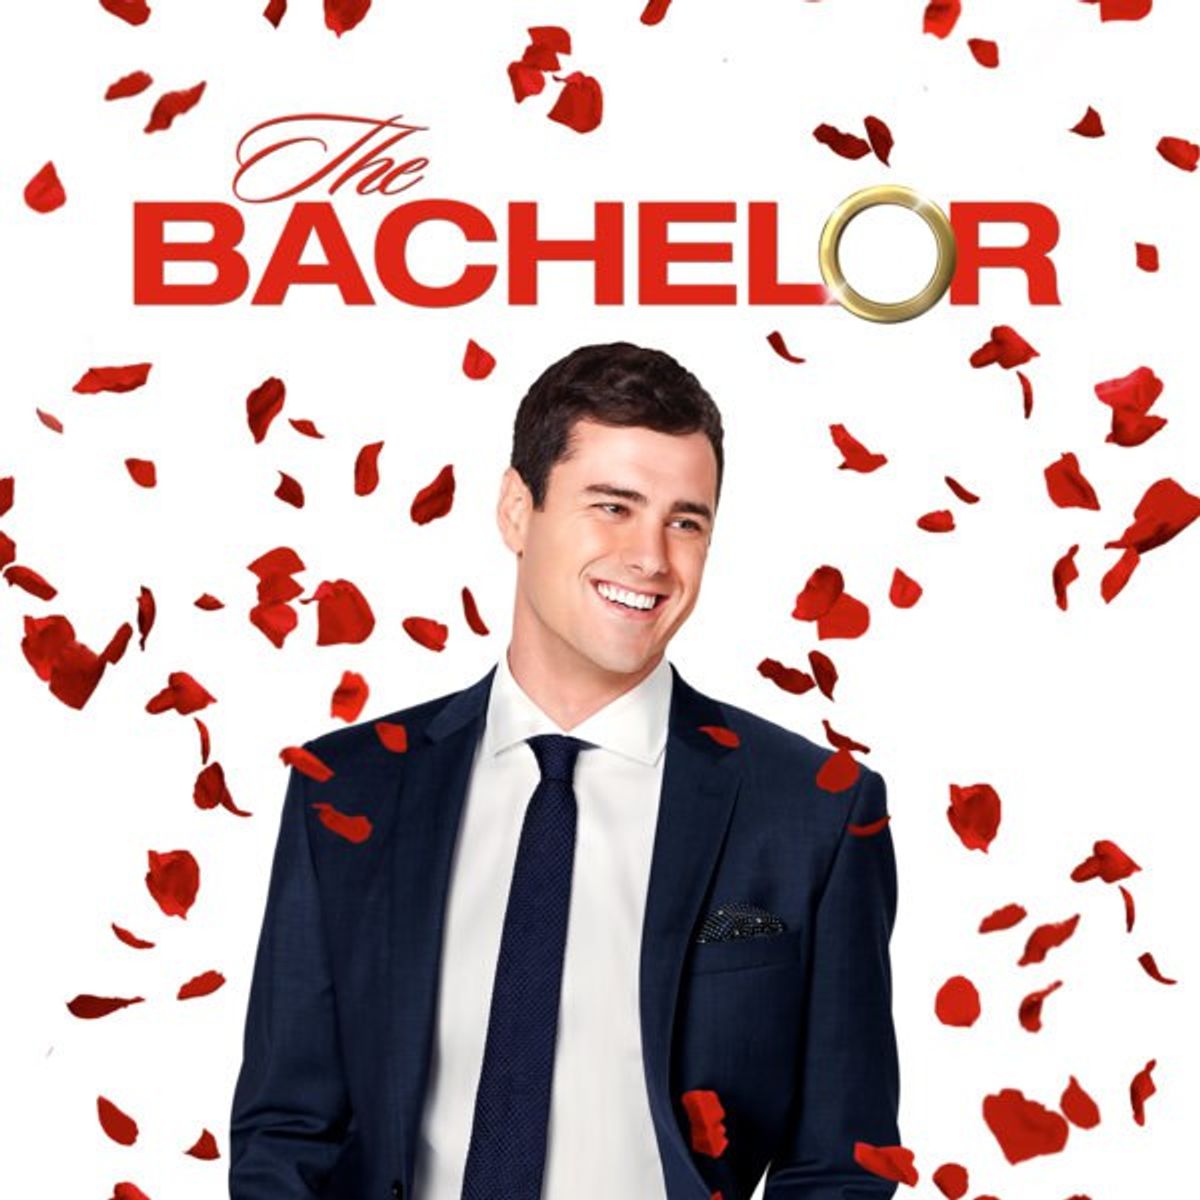 How "The Bachelor" Is Ruining Relationships